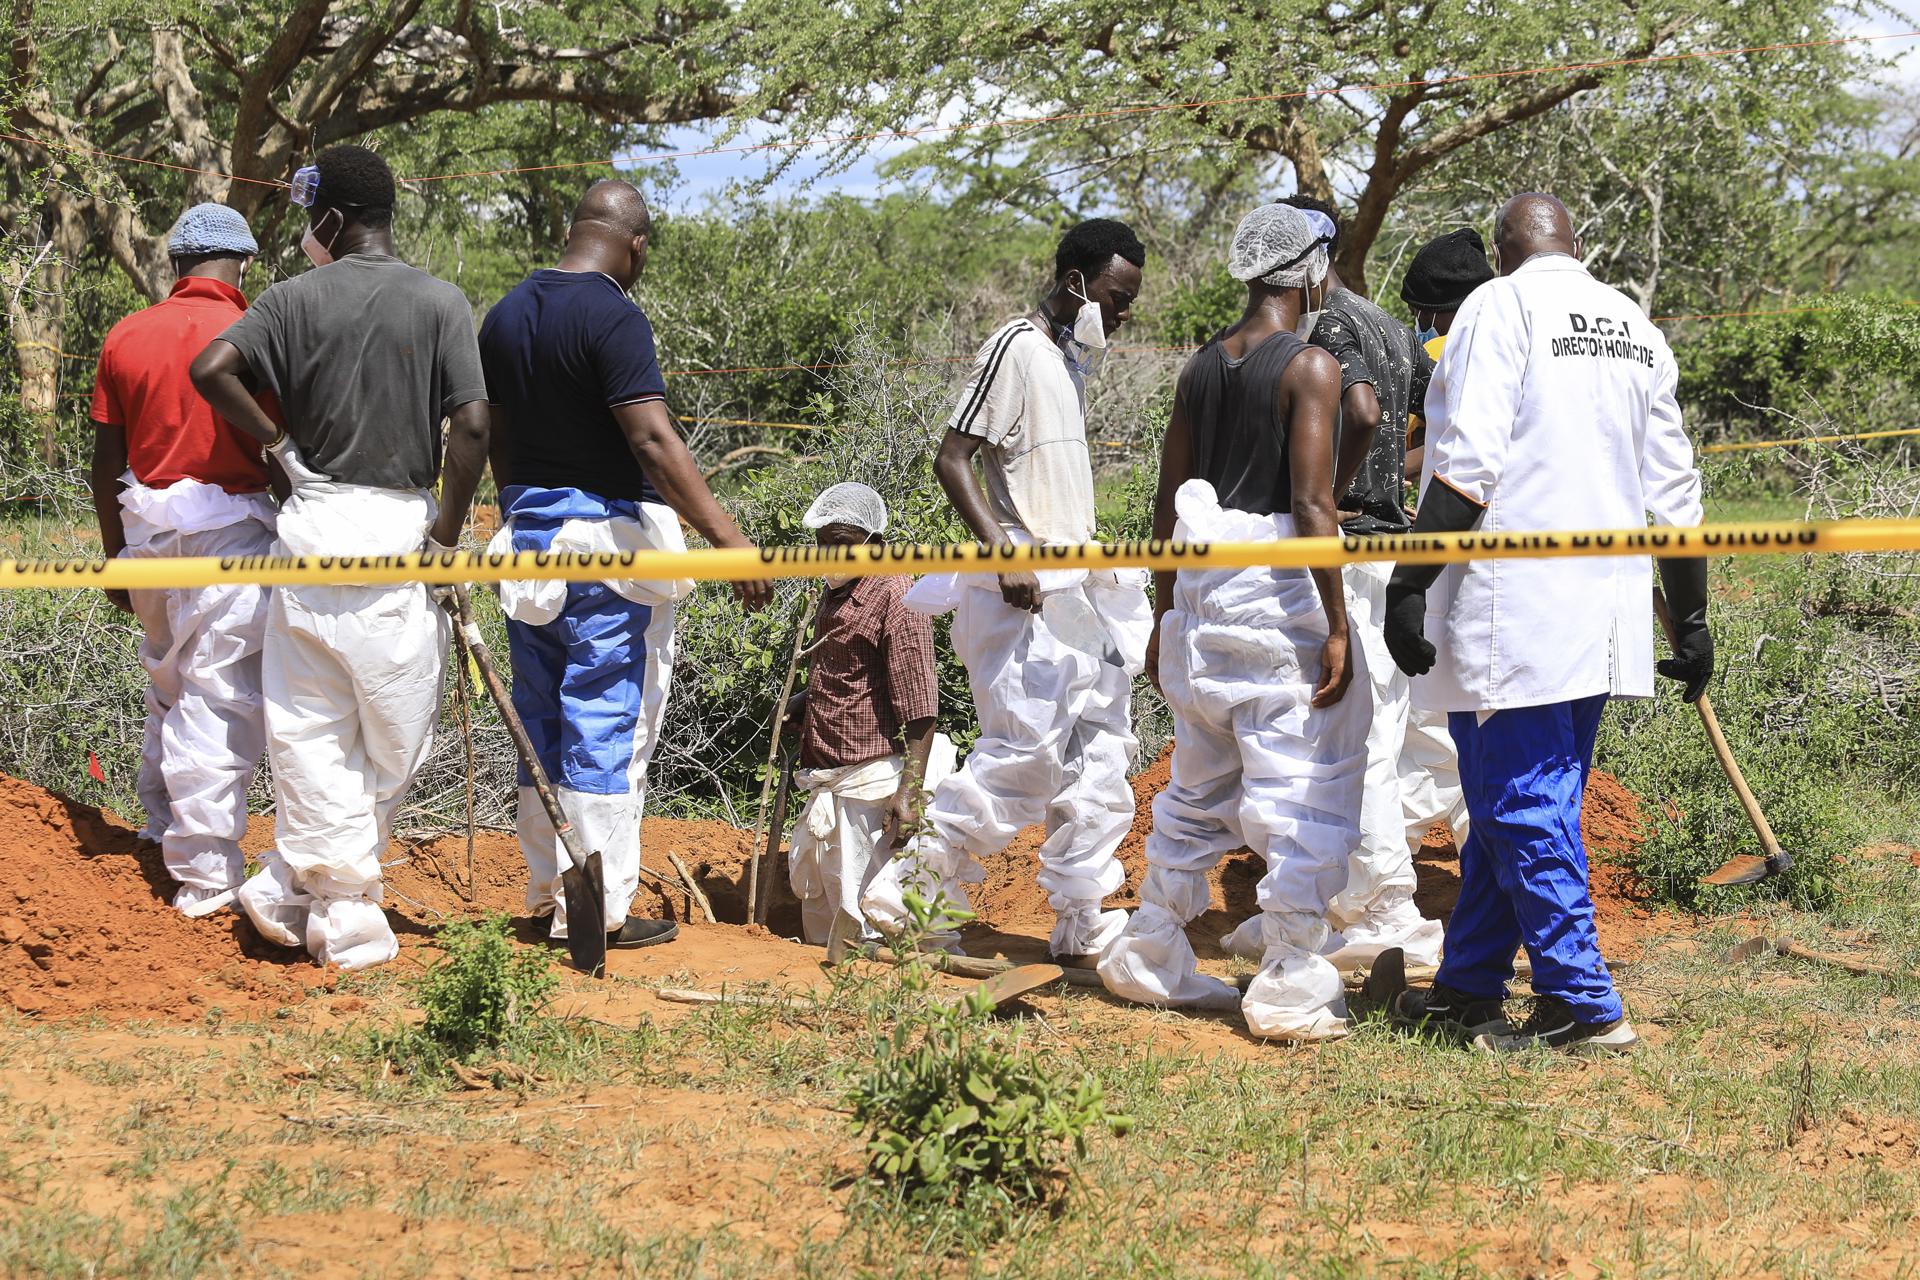 Kenyan homicide detectives and forensic experts from the Directorate of Criminal Investigations (DCI), examine exhumed bodies from several shallow mass graves of suspected members of a Christian cult after starving themselves to death, after allegedly being told by their controversial preacher Paul Mackenzie that they would go to heaven if they starved themselves to death, in the coastal Shakahola forest, in Kilifi, Kenya, 23 April 2023.  EFE/EPA/STR
